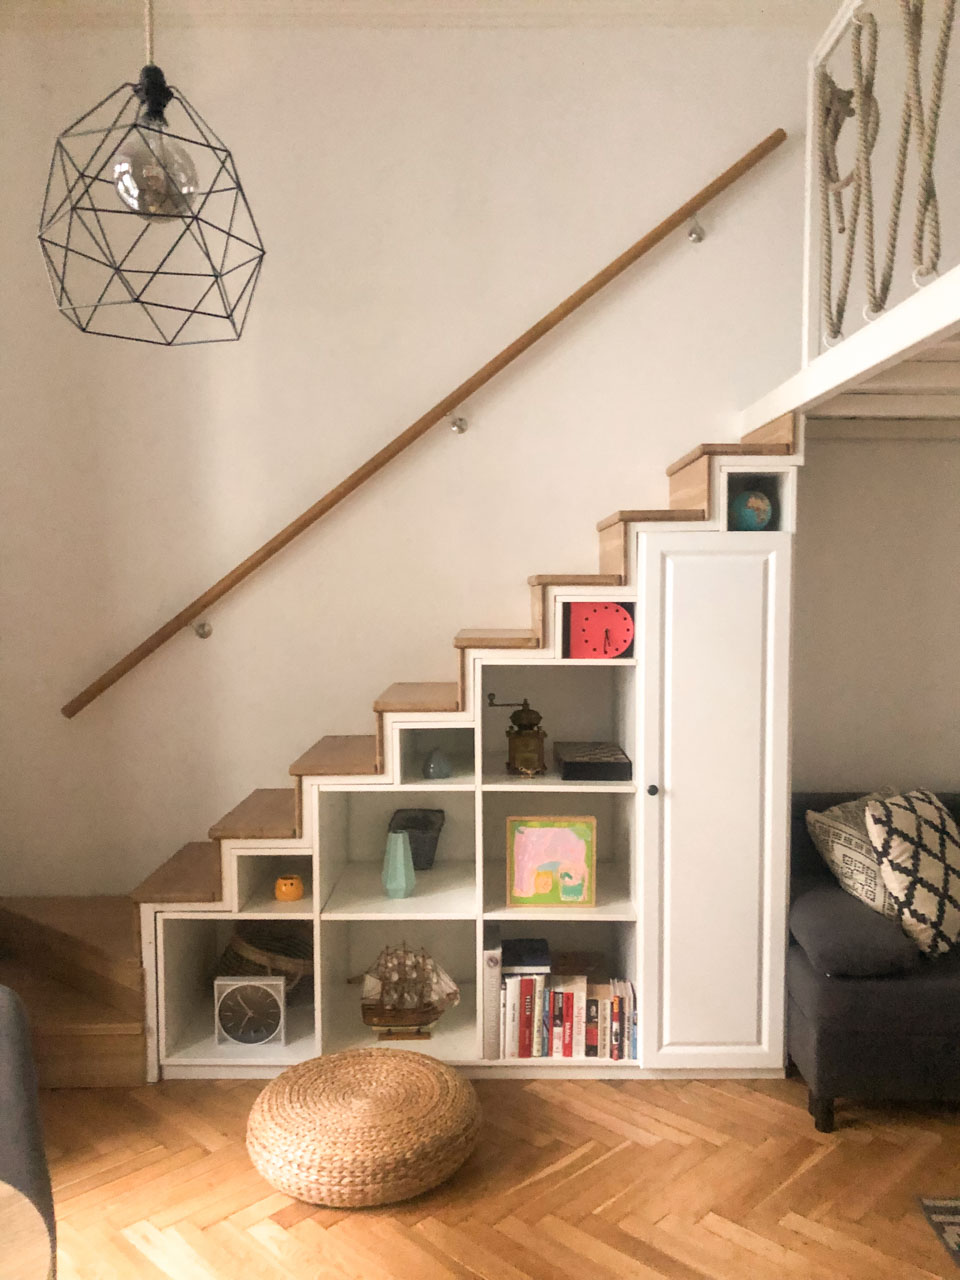 A shelving unit under the stairs